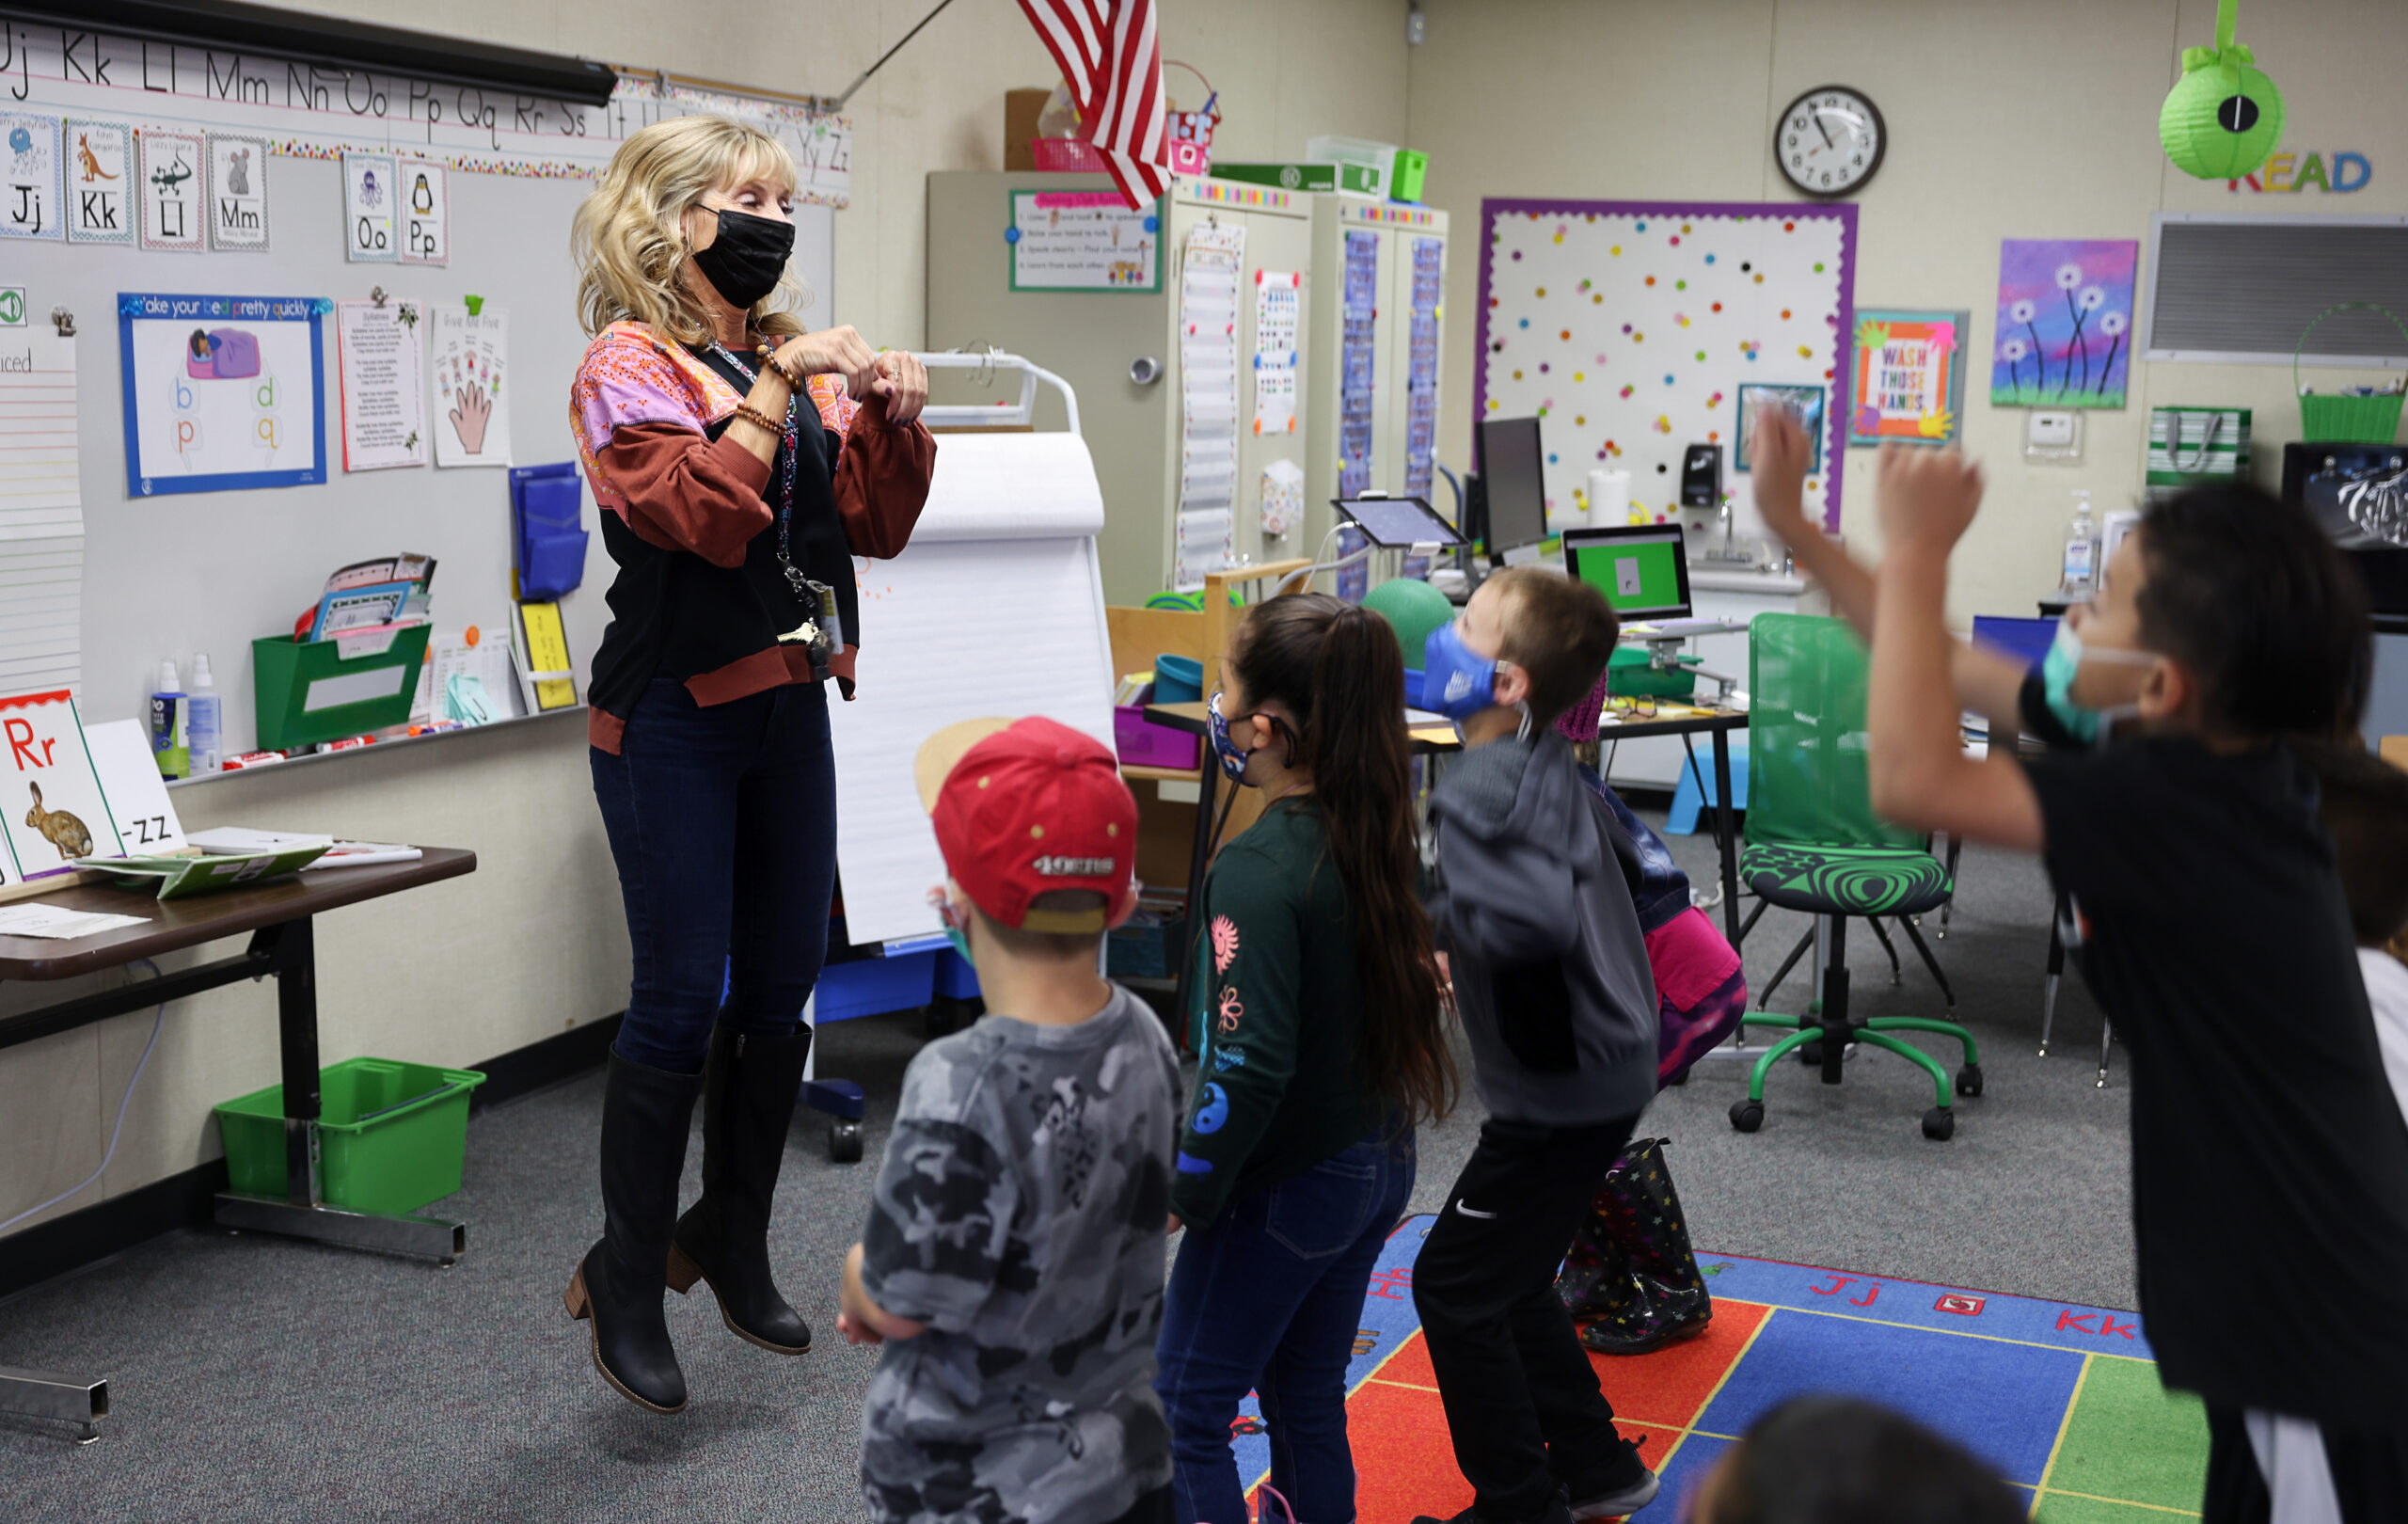 Teacher Jen Grady has her class hop like rabbits while teaching them the letter R in her reading intervention class at Mattie Washburn Elementary School in Windsor on Tuesday, November 2, 2021. (Christopher Chung/ The Press Democrat)